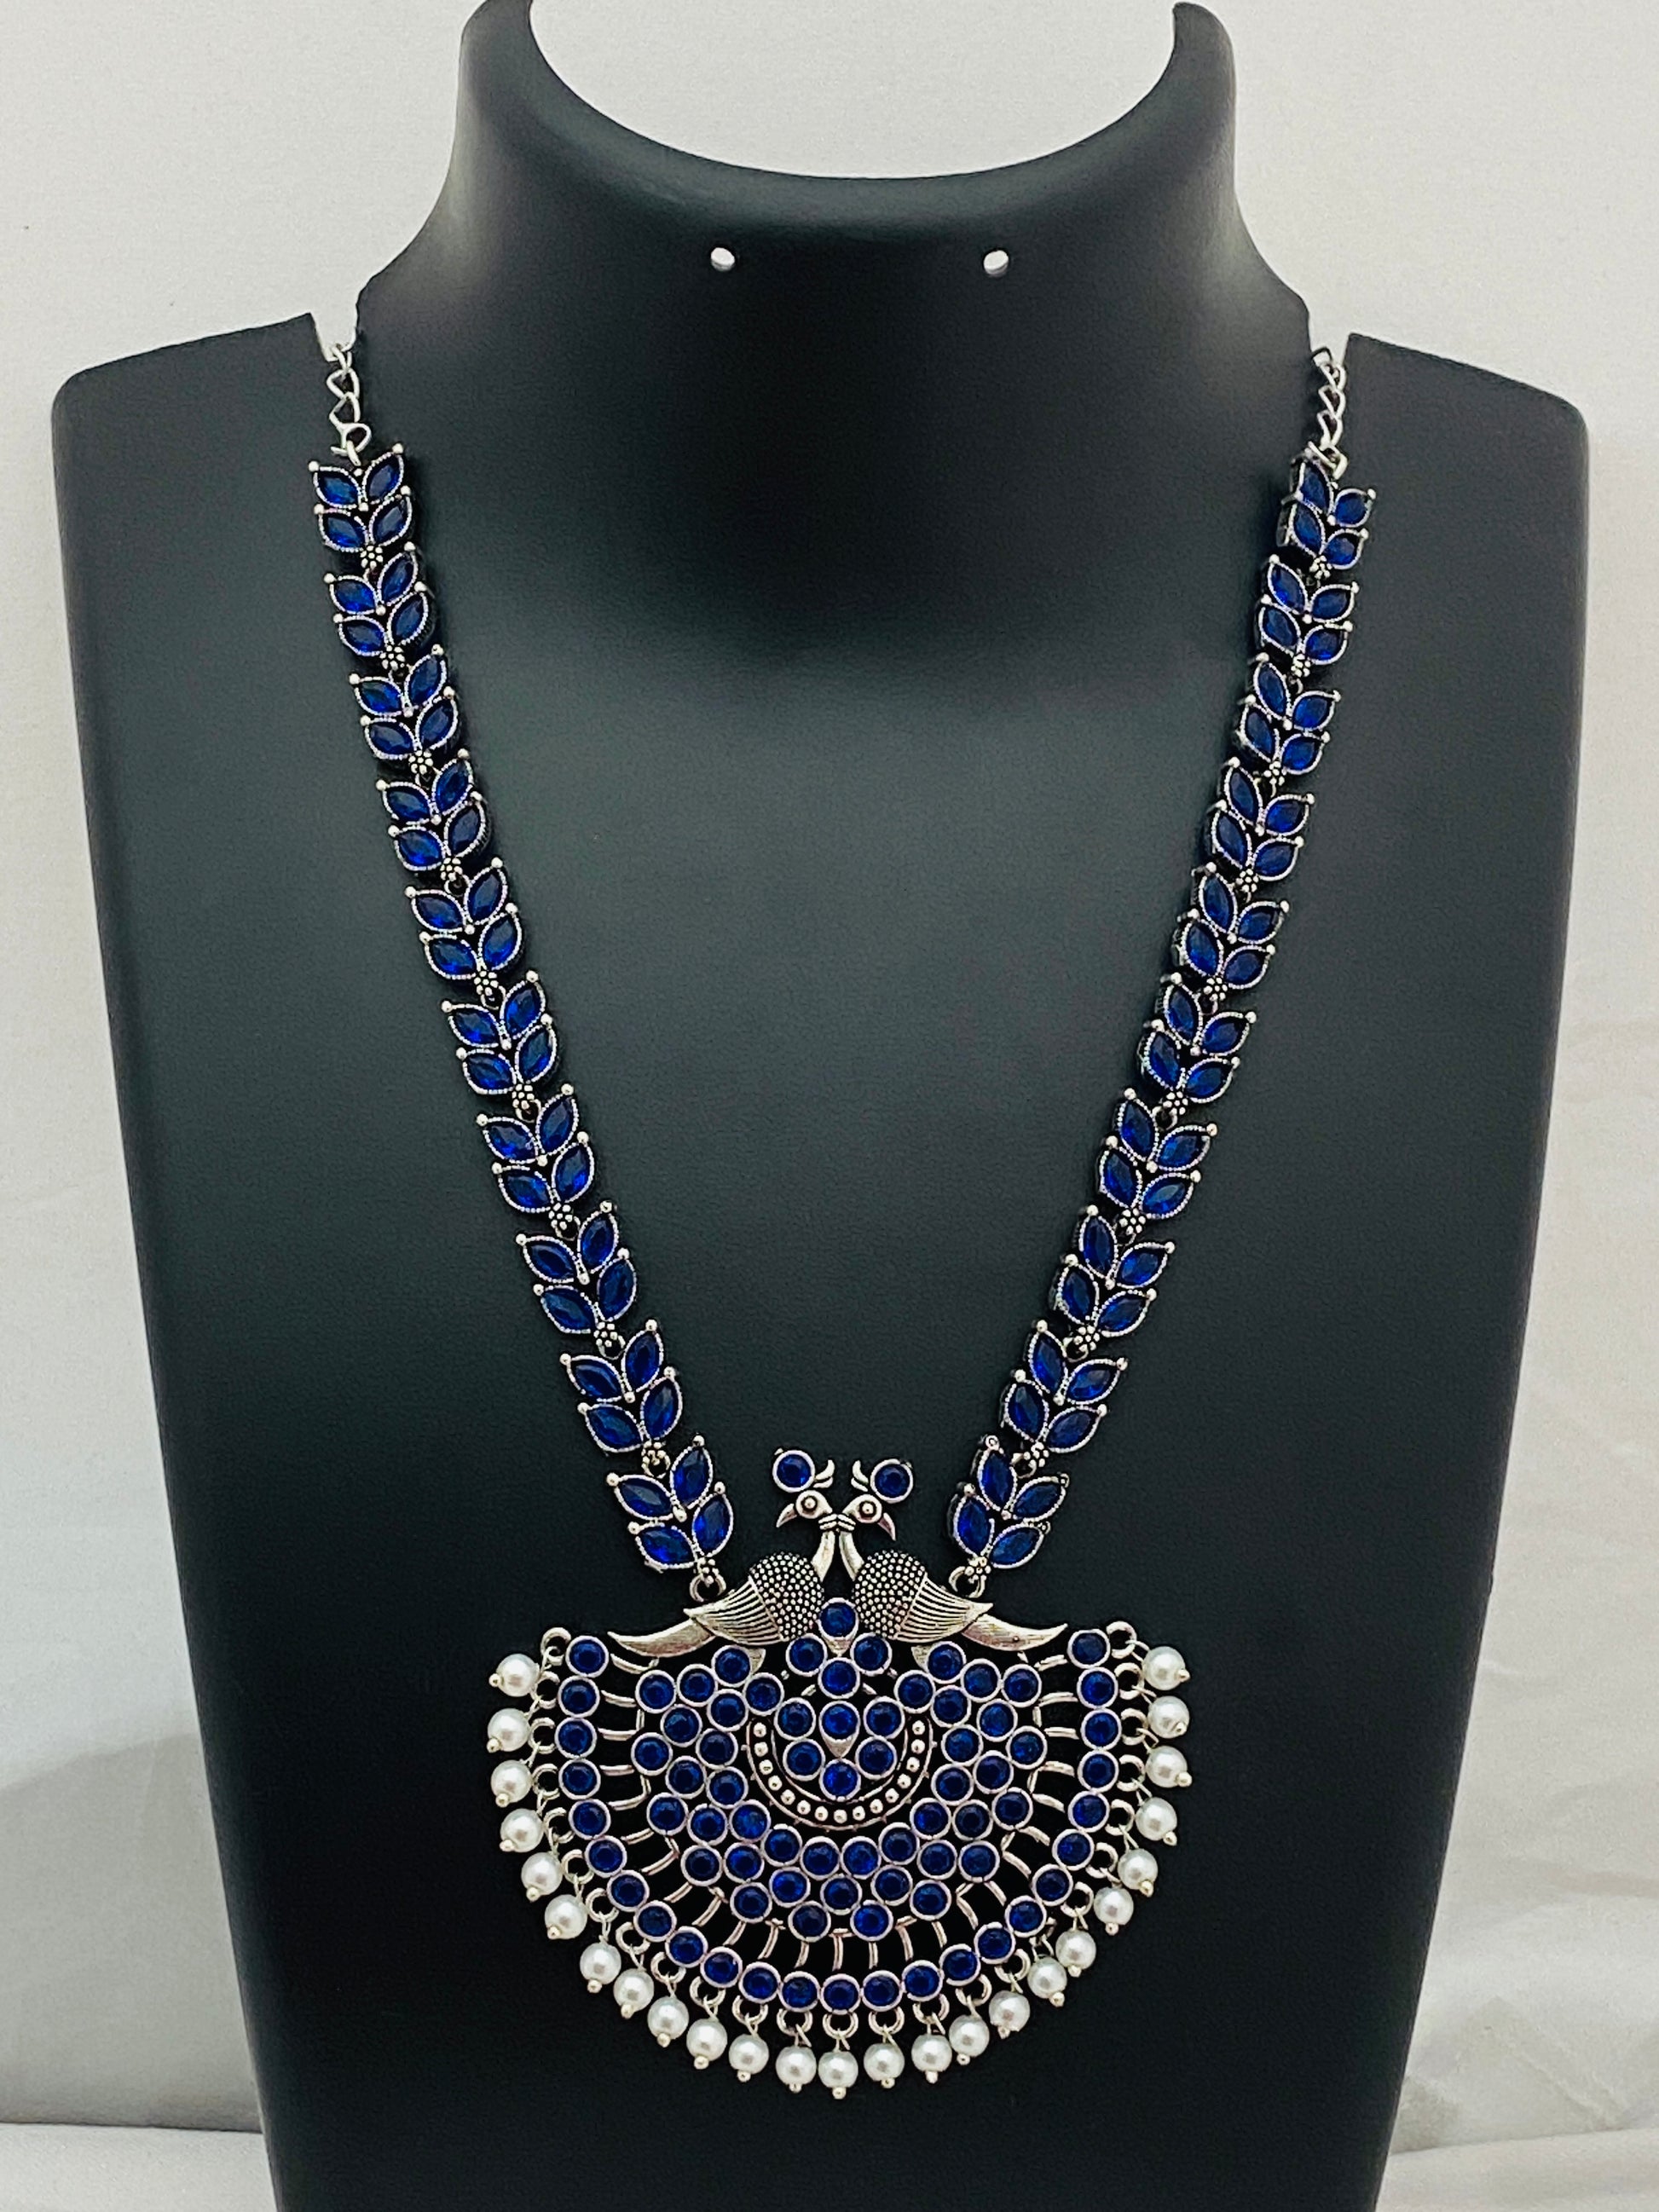  Heavy Pendant Necklace With Earrings In USA